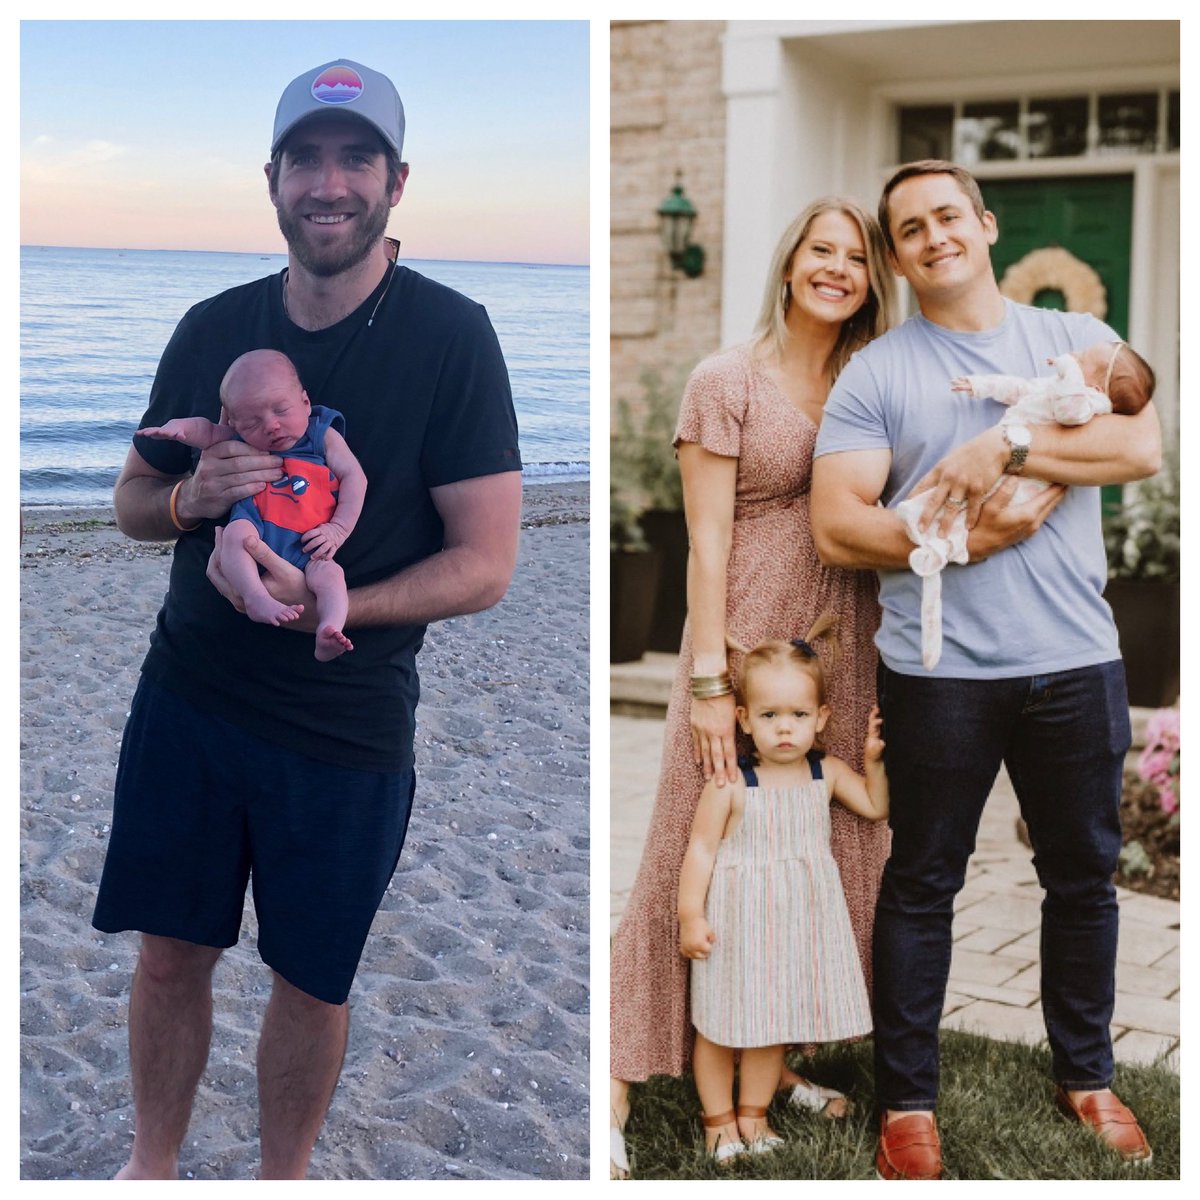 “Let them give light to the world” 

Congrats to both Kevin Joy ‘09 & wife Christine, as well as Jake Boyce ‘09 & wife Laura!! Both families welcomed new additions the last couple weeks. Austin & Hadley are ready to thrive 💪🏻 #Fam #FutureCats